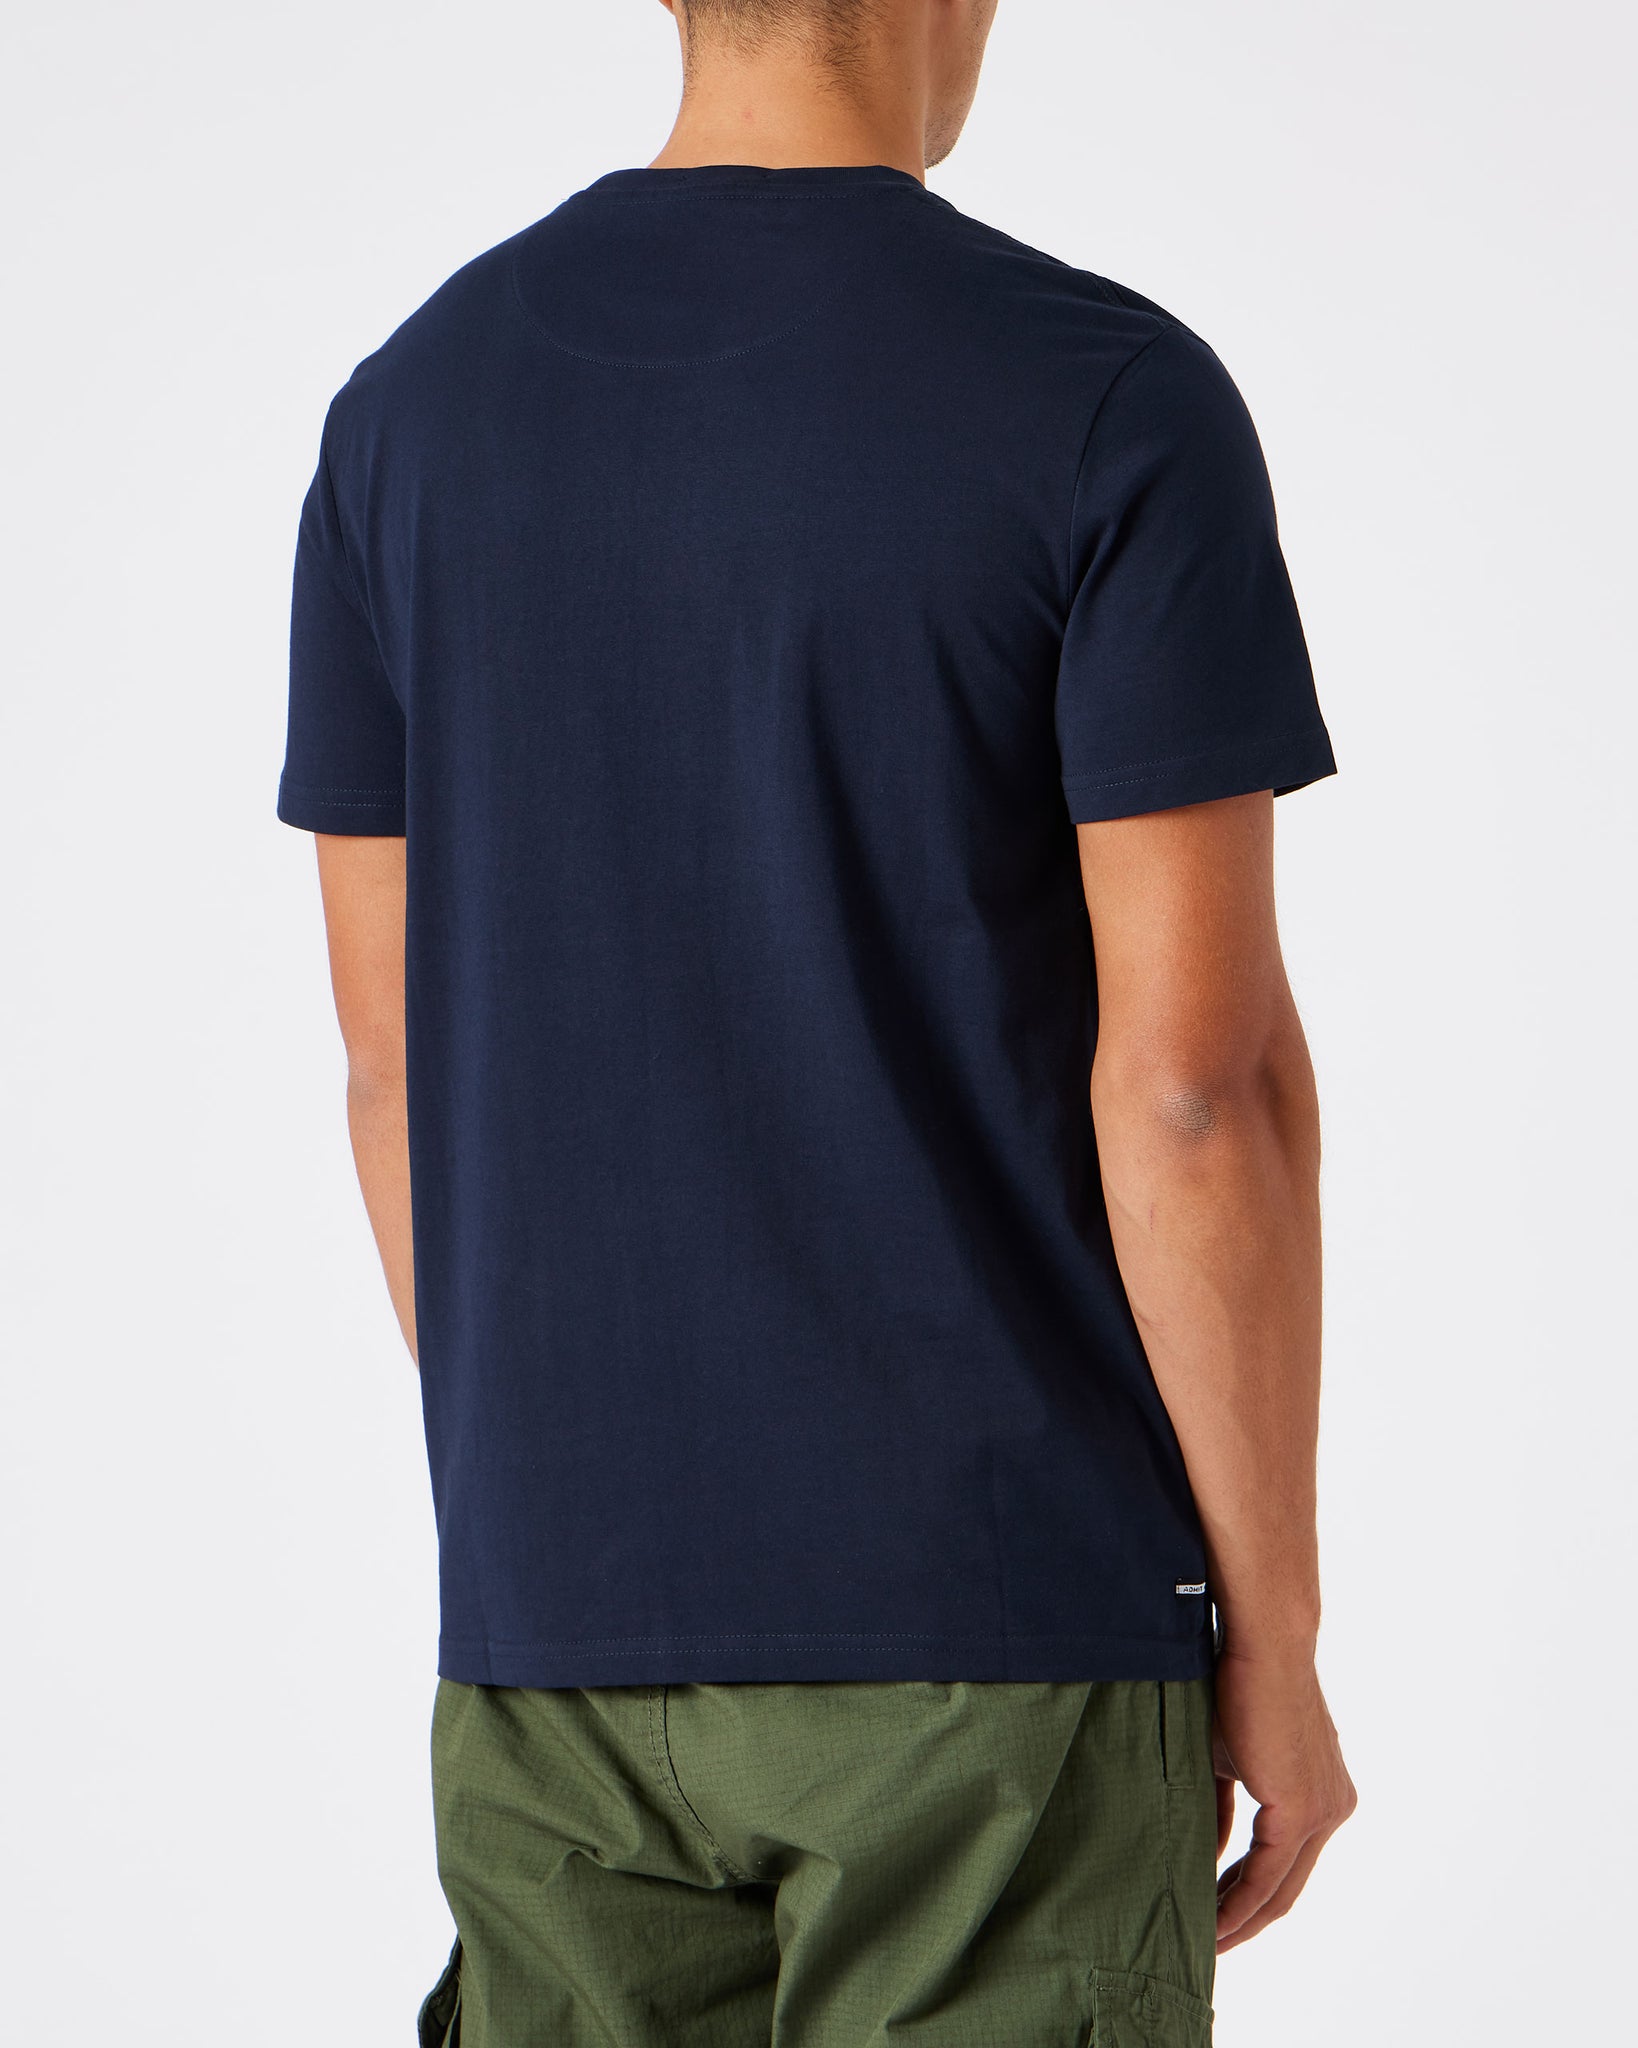 Baccalieri Graphic T-Shirt Navy